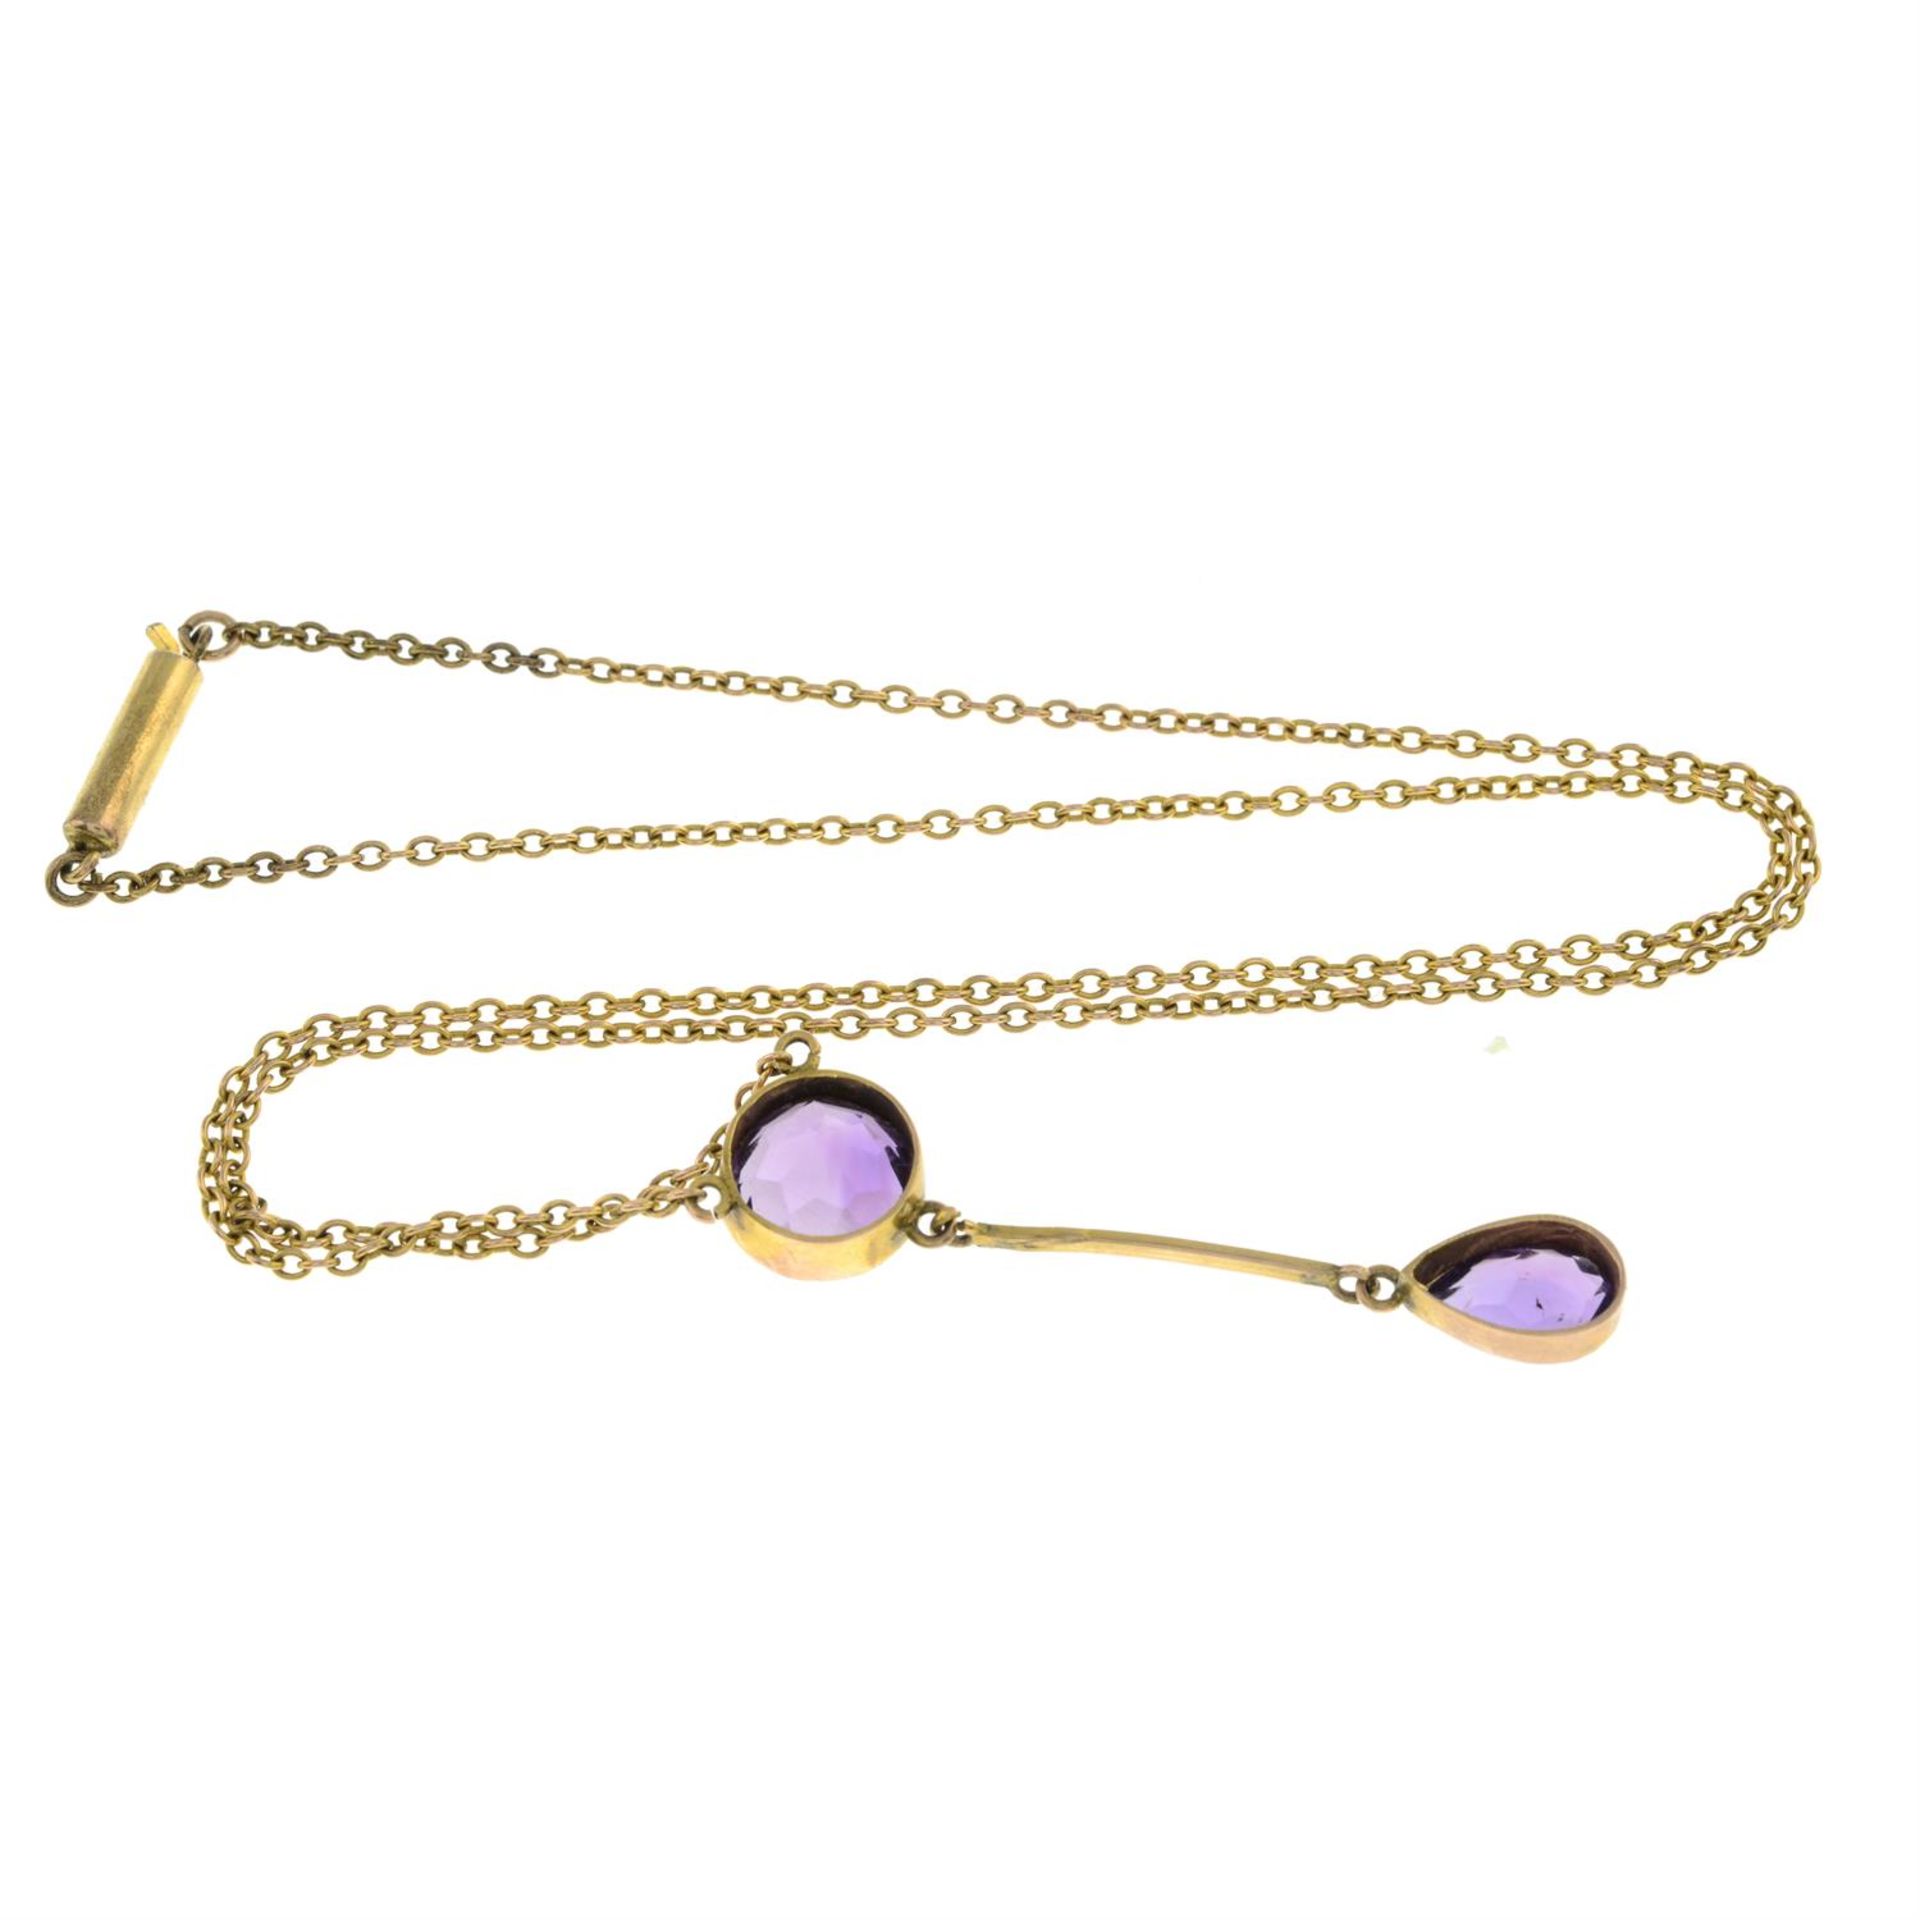 Early 20th century 9ct gold amethyst necklace - Image 2 of 2